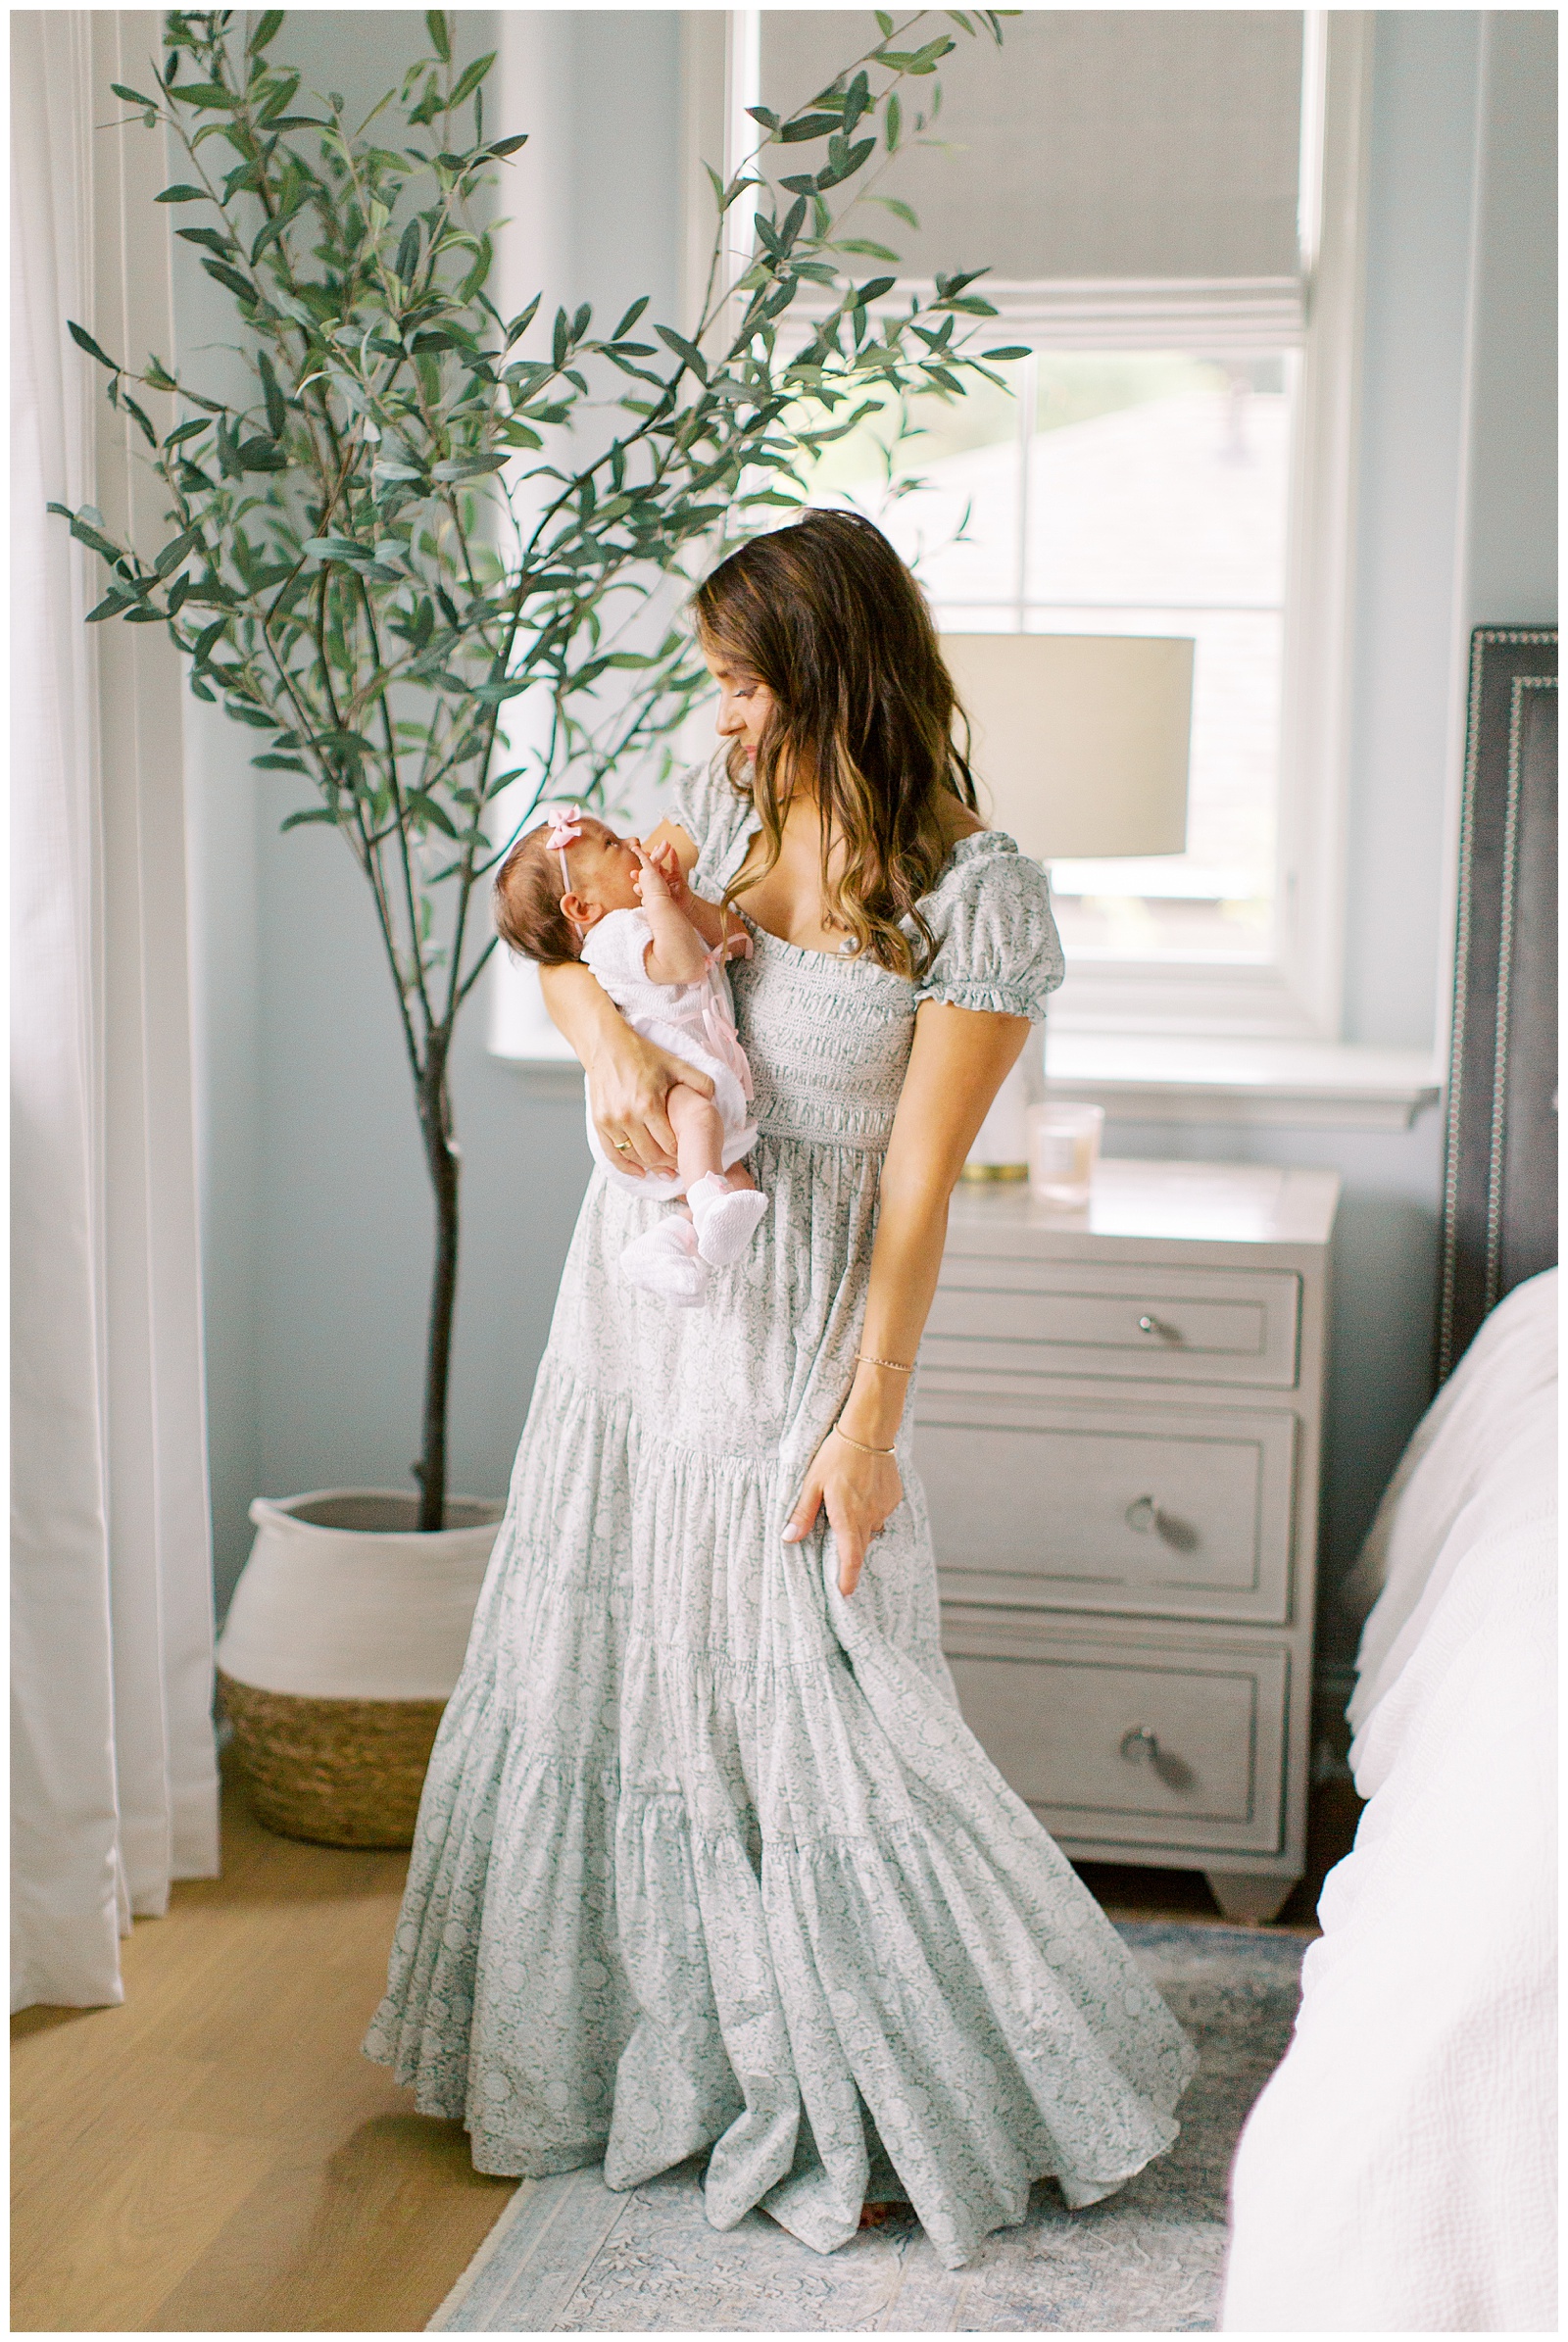 mom holds daughter and twirls dress during Lifestyle Newborn Session in Charlotte